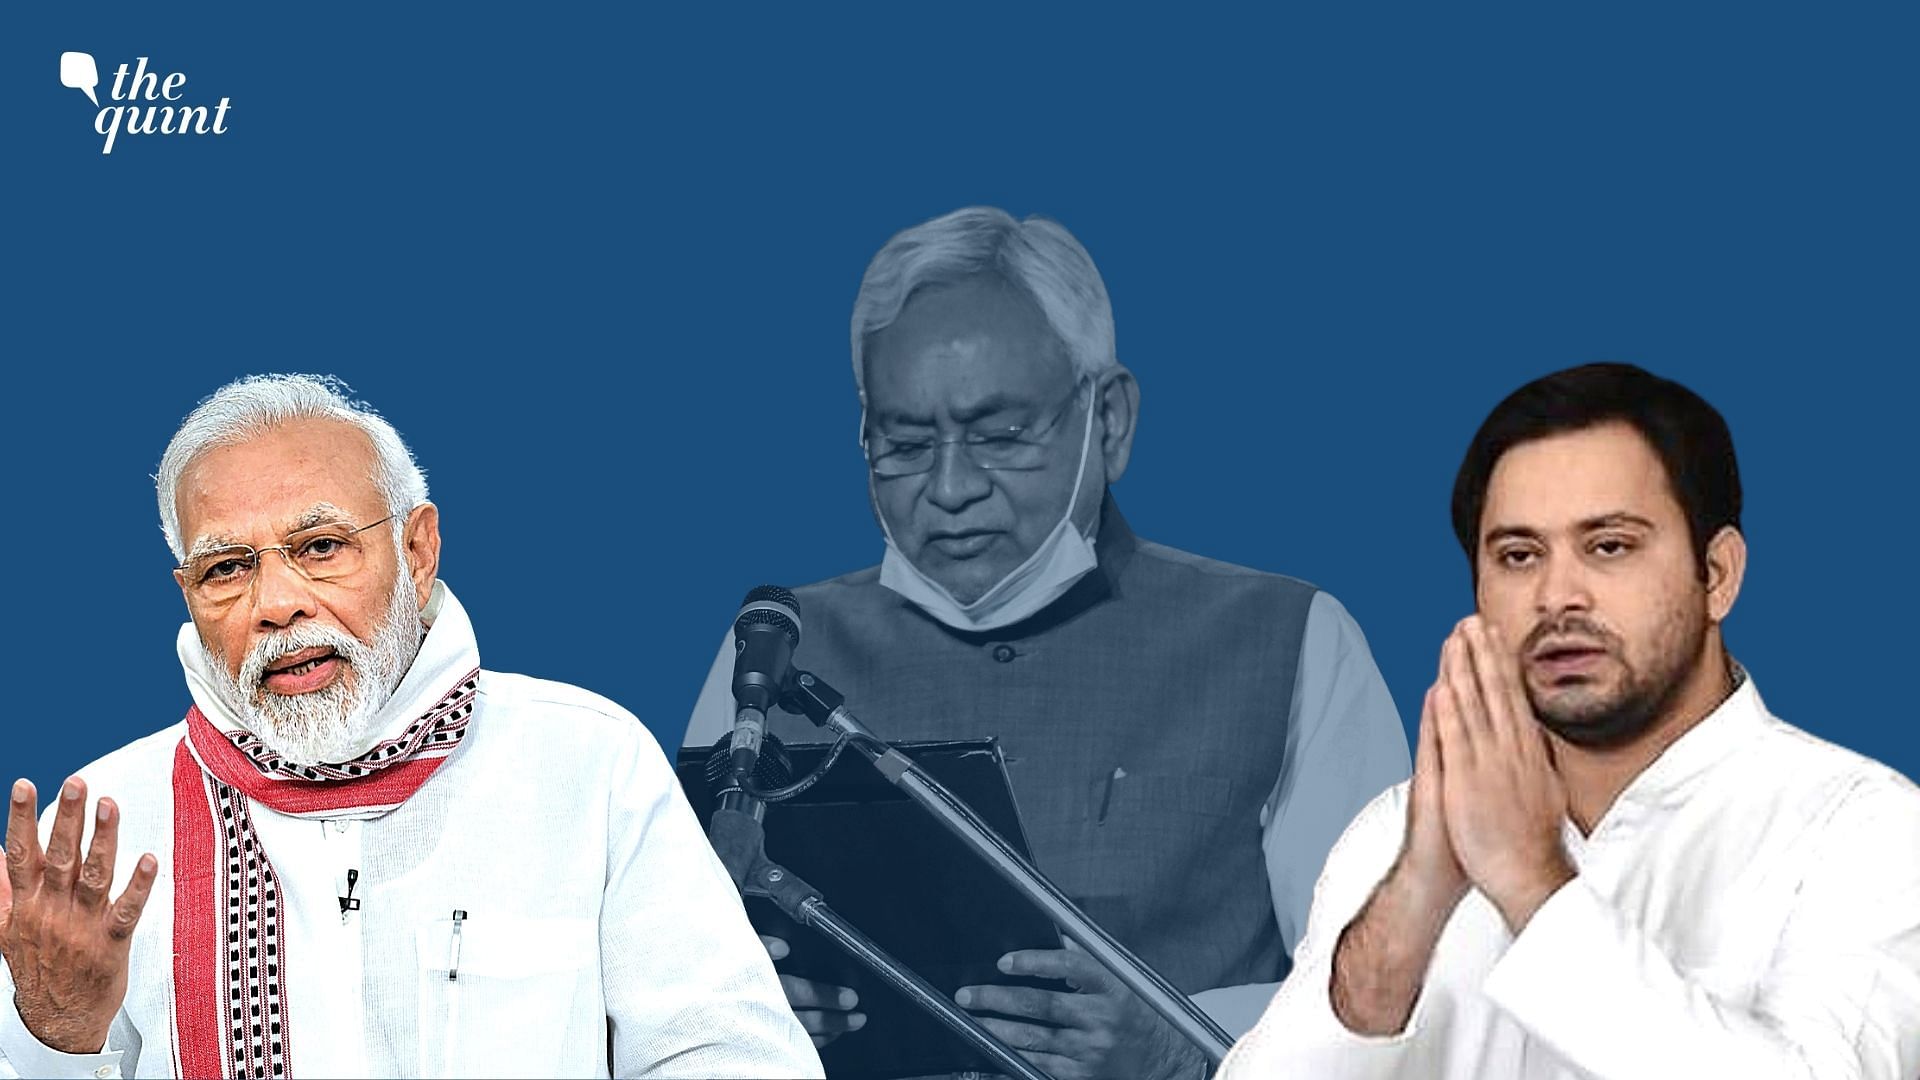 <div class="paragraphs"><p>Bihar’s Leader of Opposition Parties Tejashwi Yadav, on Friday, 13 August, said that Prime Minister (PM) Narendra Modi had insulted <a href="https://www.thequint.com/news/india/nitish-kumar-requests-pm-modi-to-meet-discuss-caste-based-census">Chief Minister (CM) Nitish Kumar</a> by not meeting him to discuss the need for a Caste-based Census. </p></div>